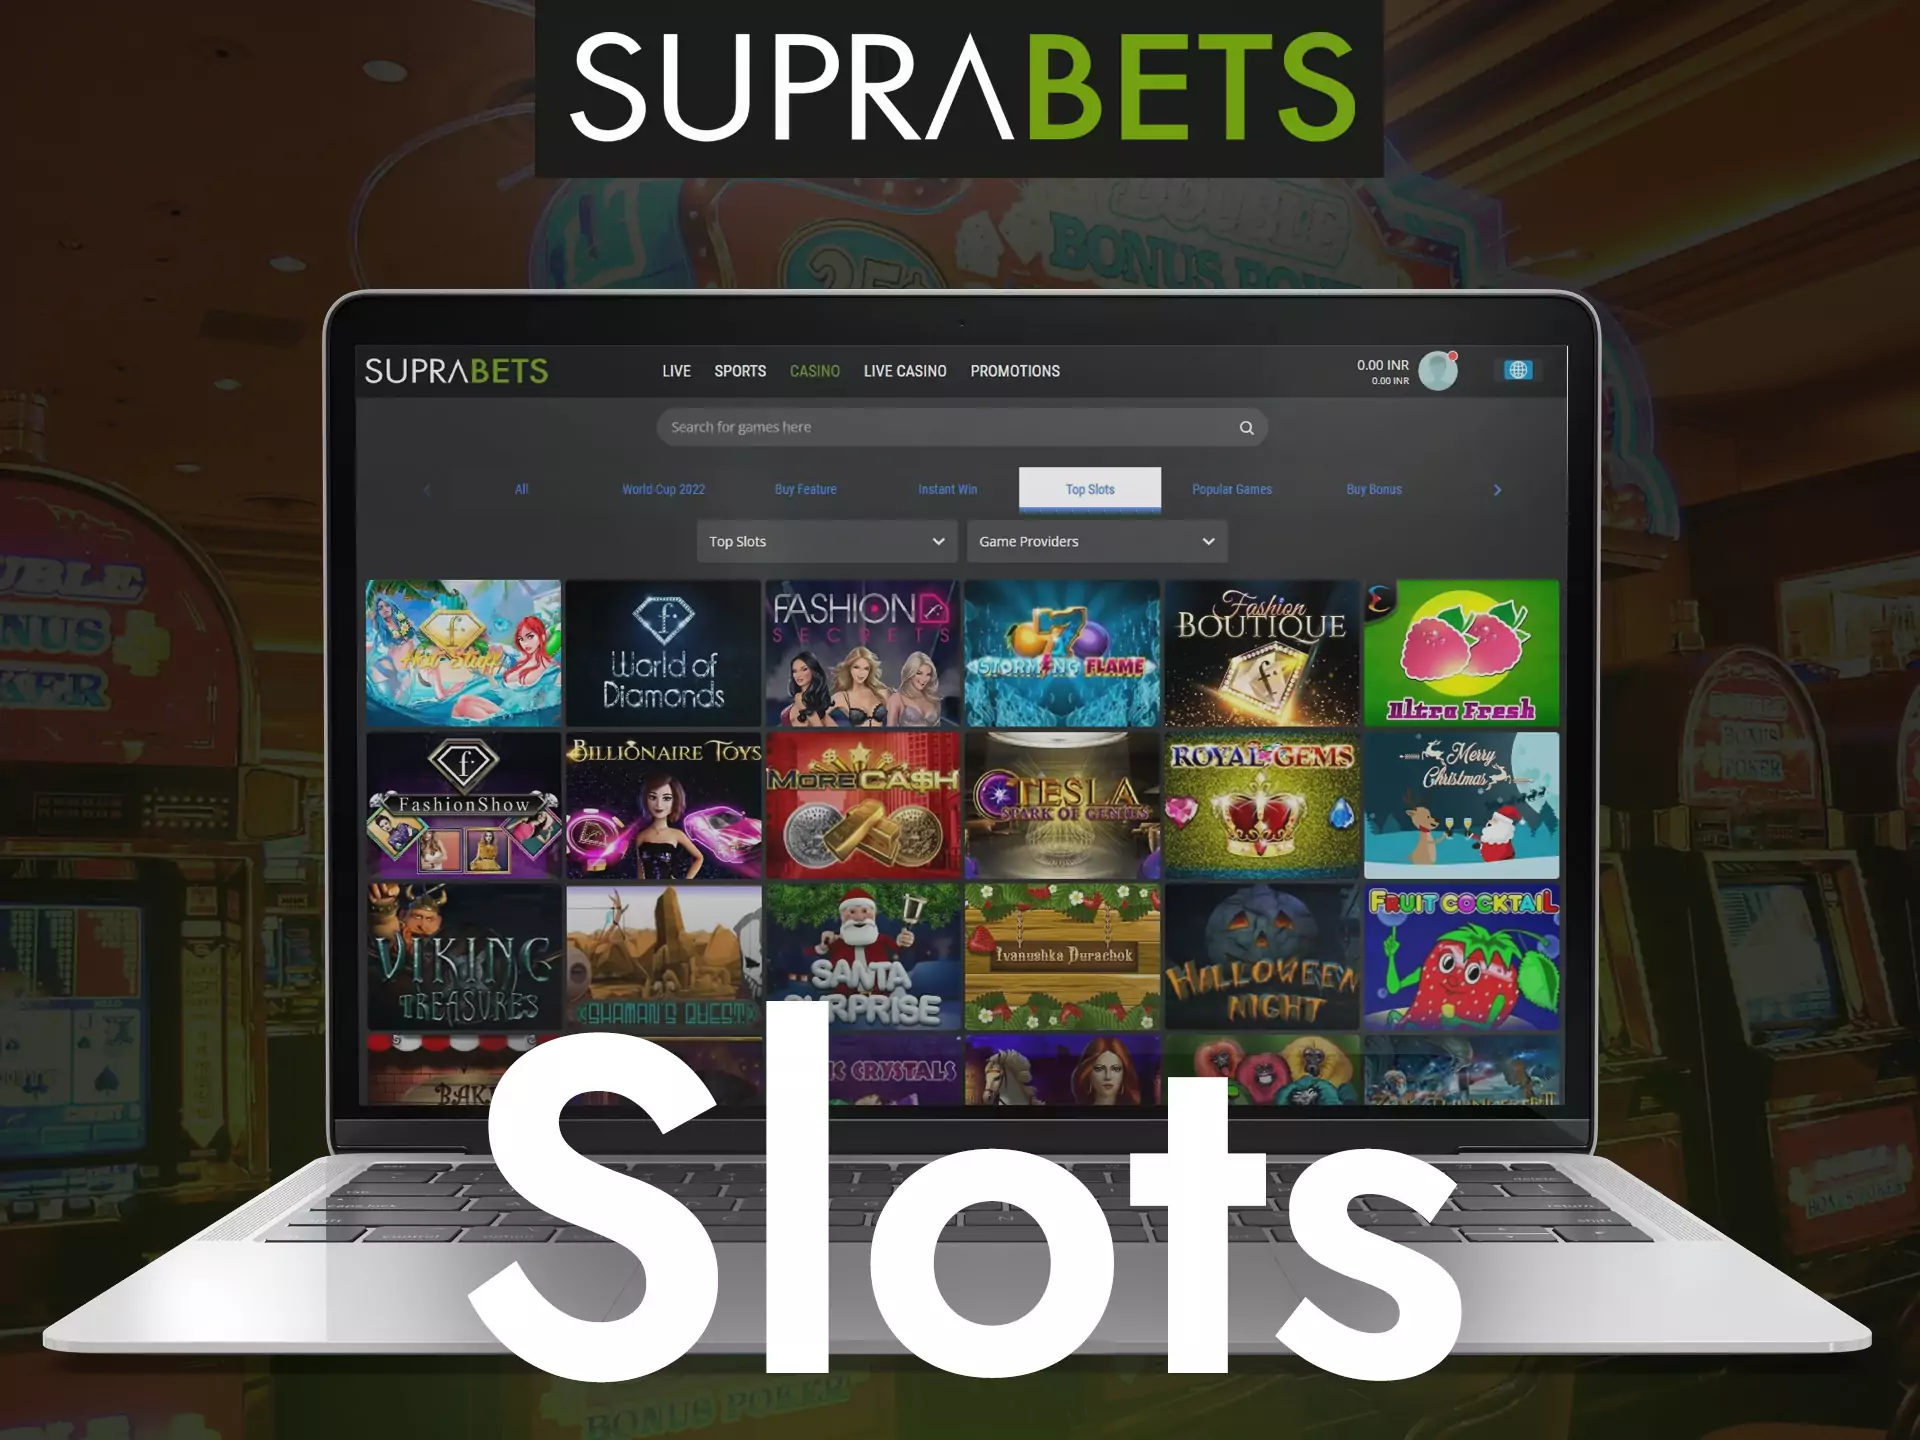 At Suprabets Casino, players can try slots.